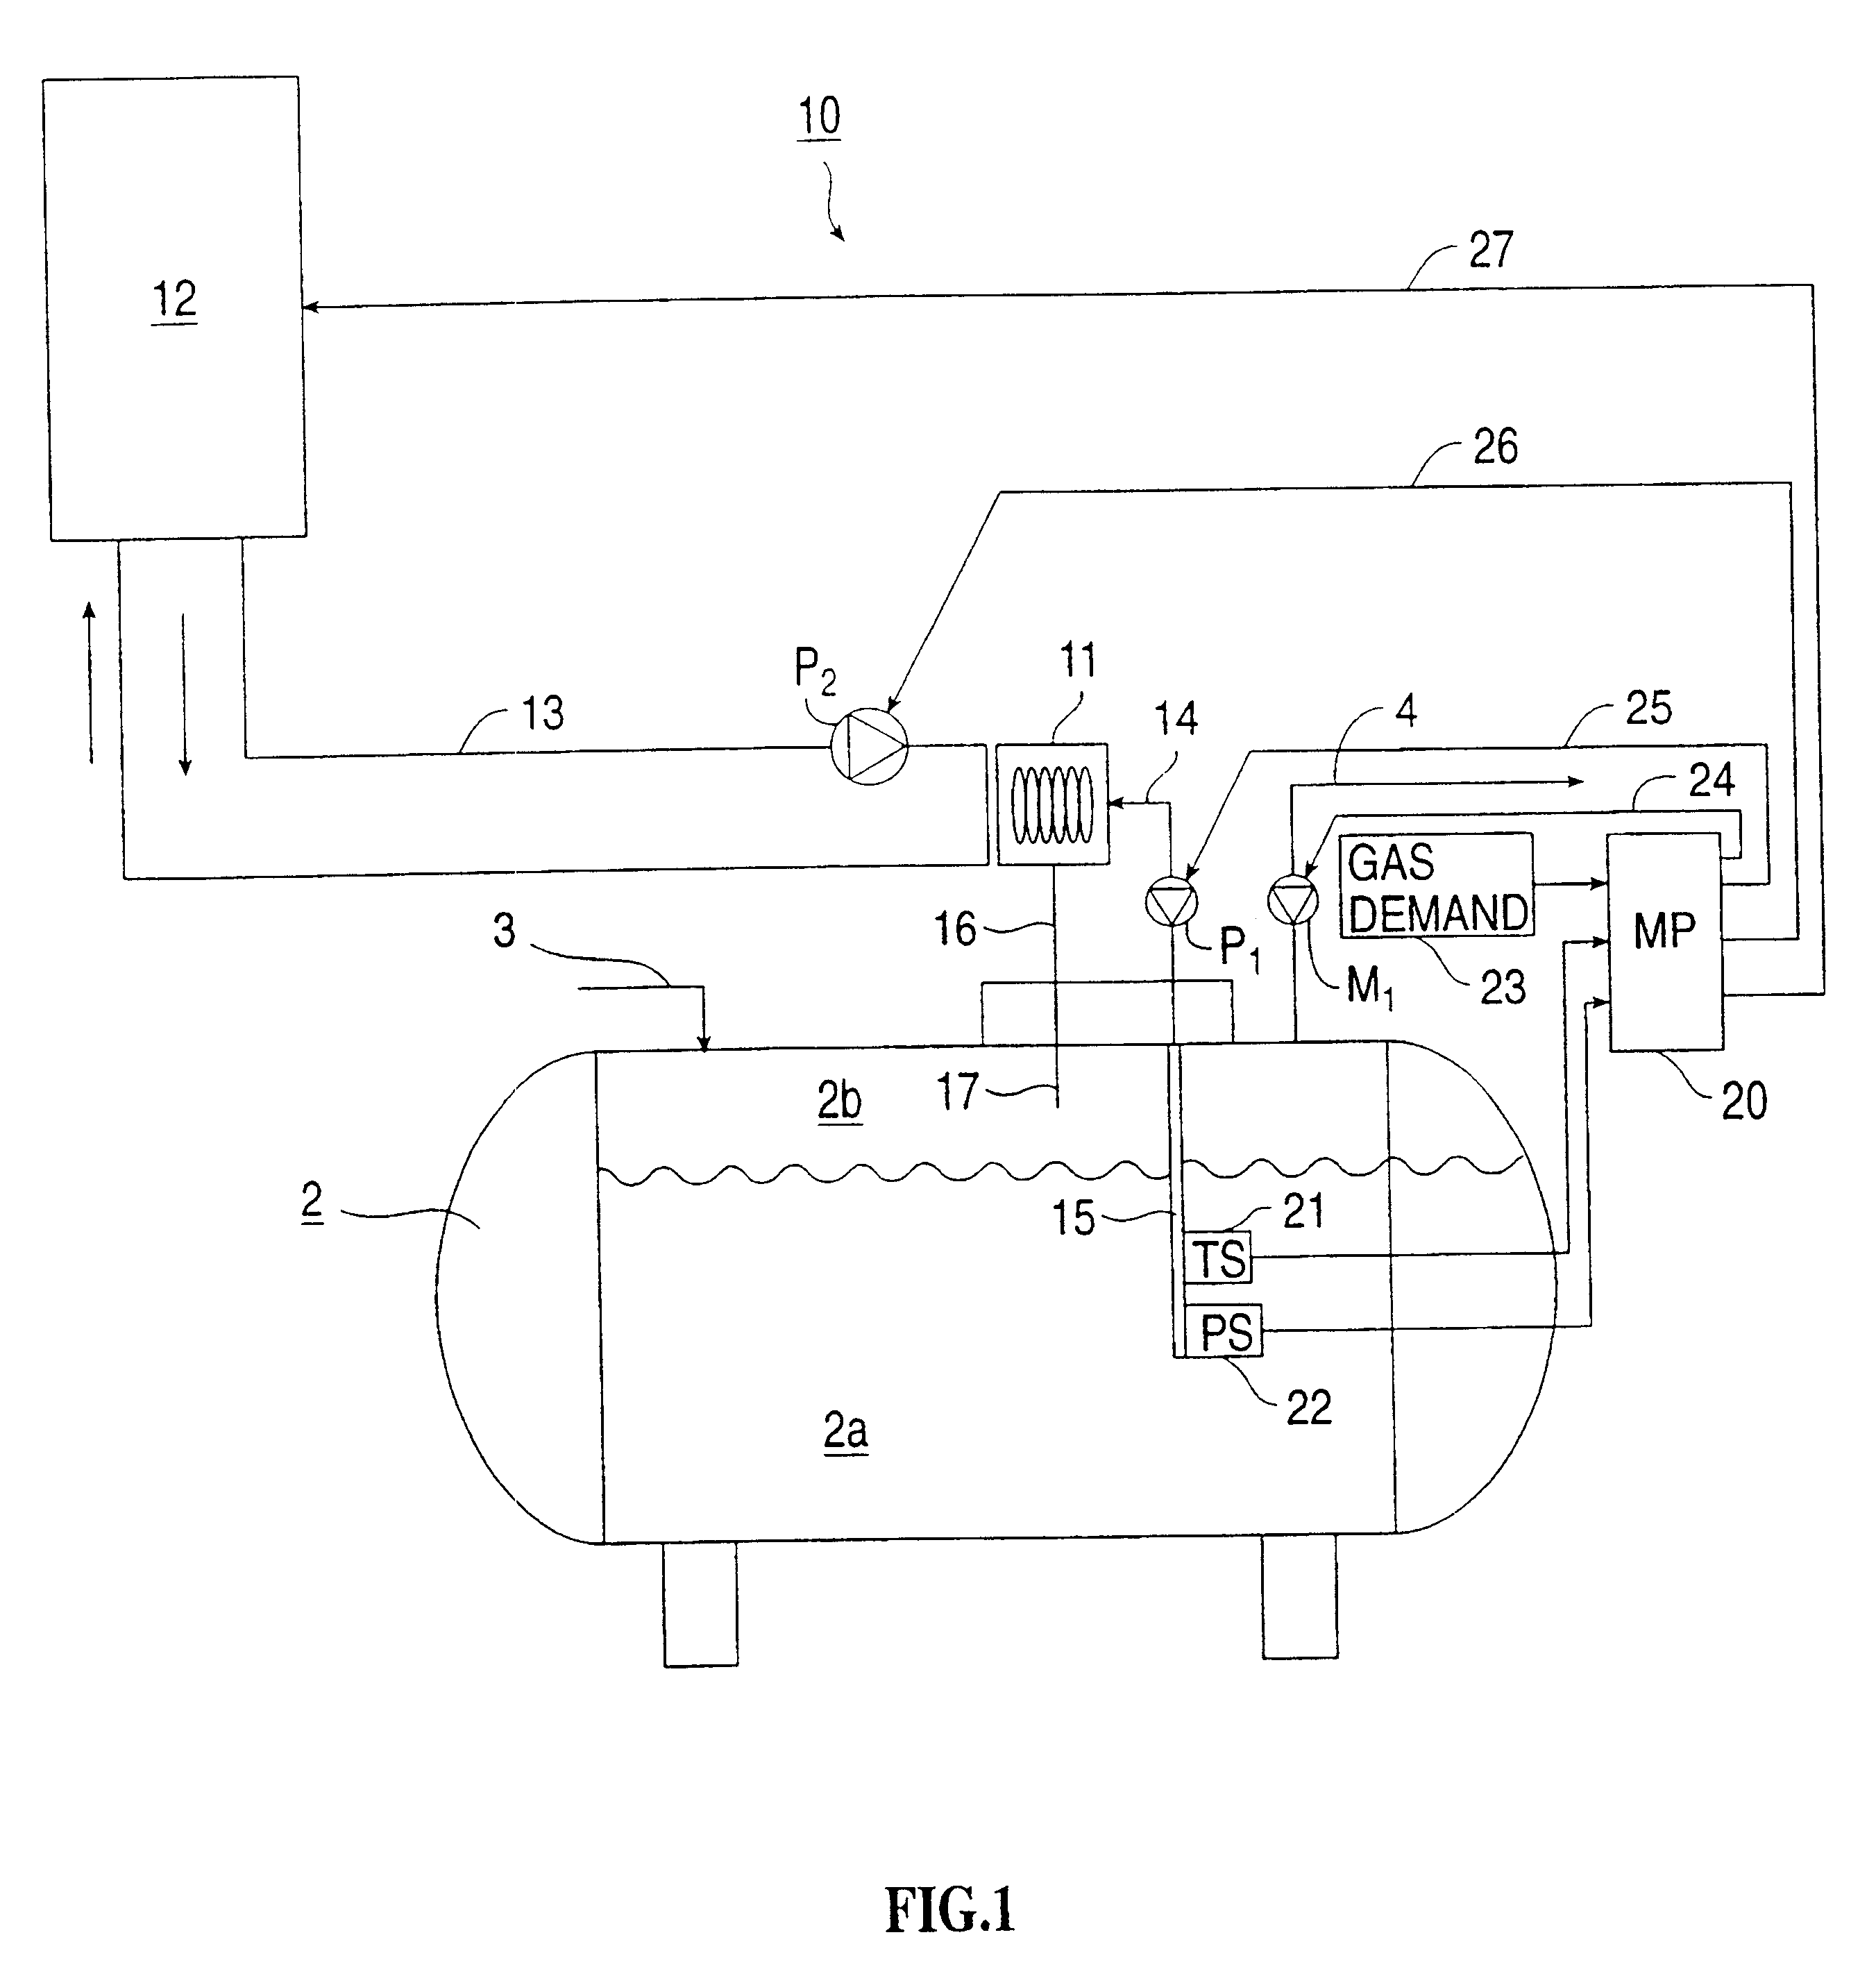 Method and apparatus for supplying vaporized gas on consumer demand